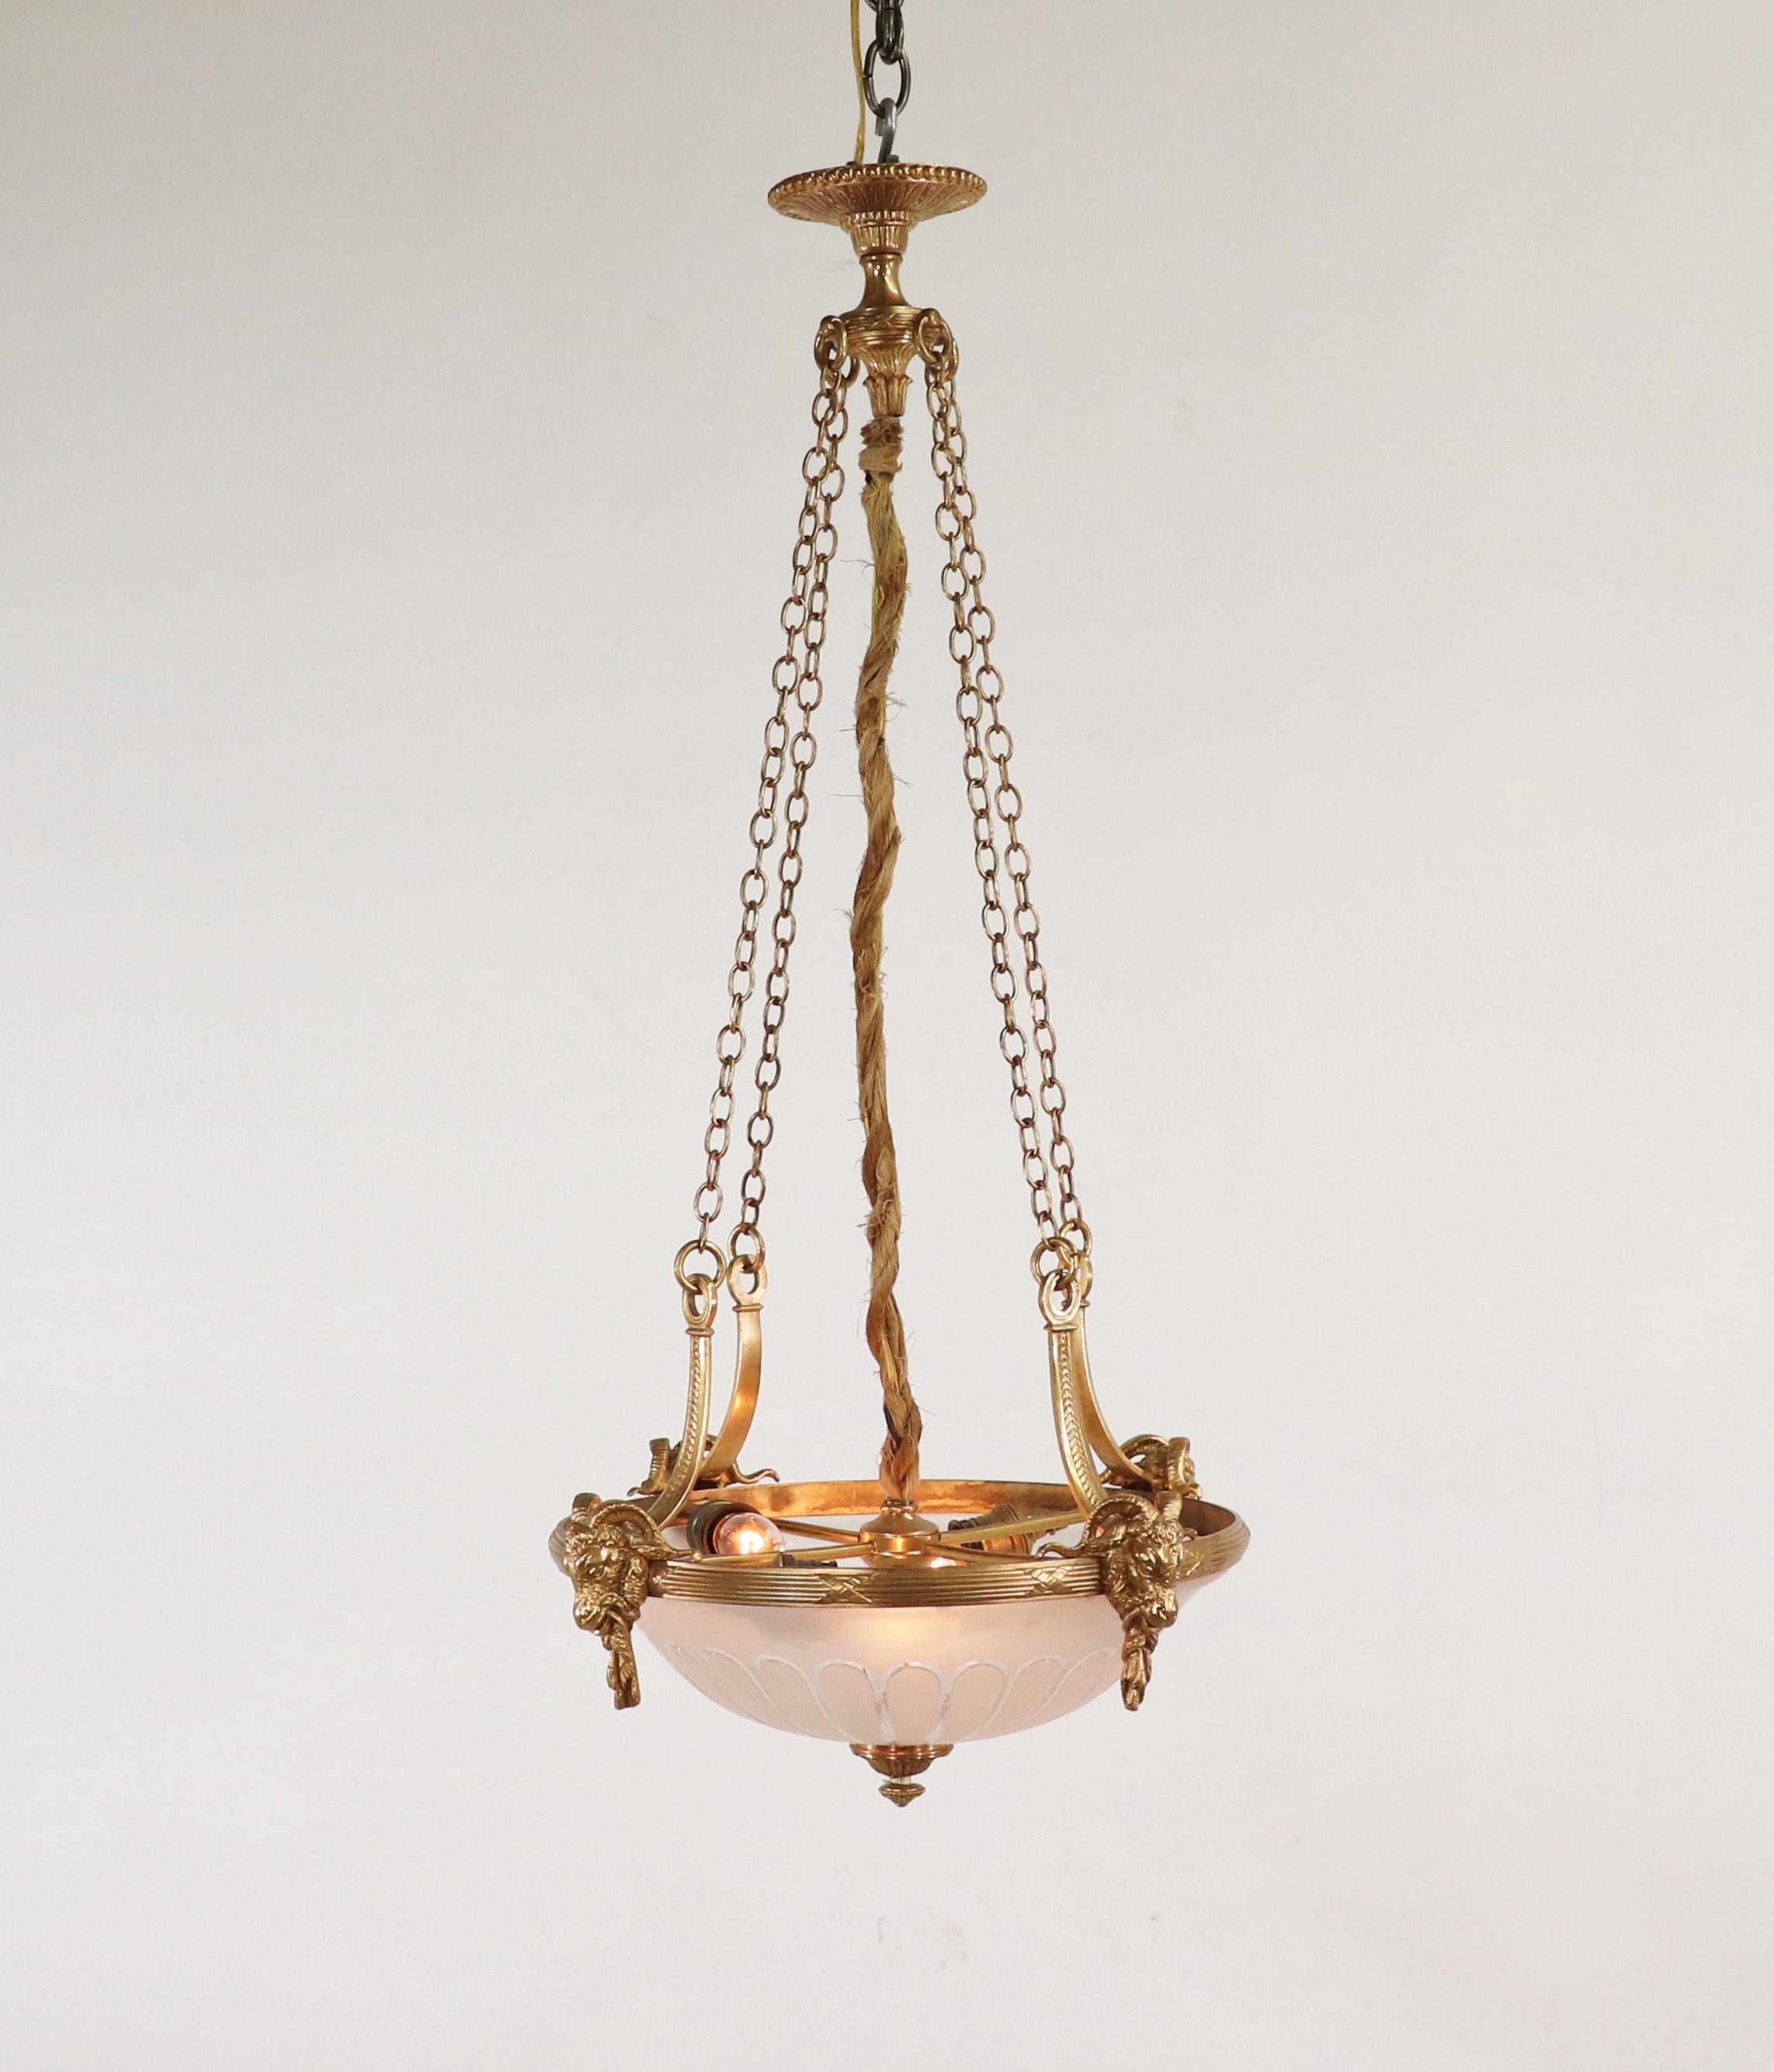 Metalwork Early 20th Century French Neoclassical Pendant Chandelier with Ormolu and Glass For Sale